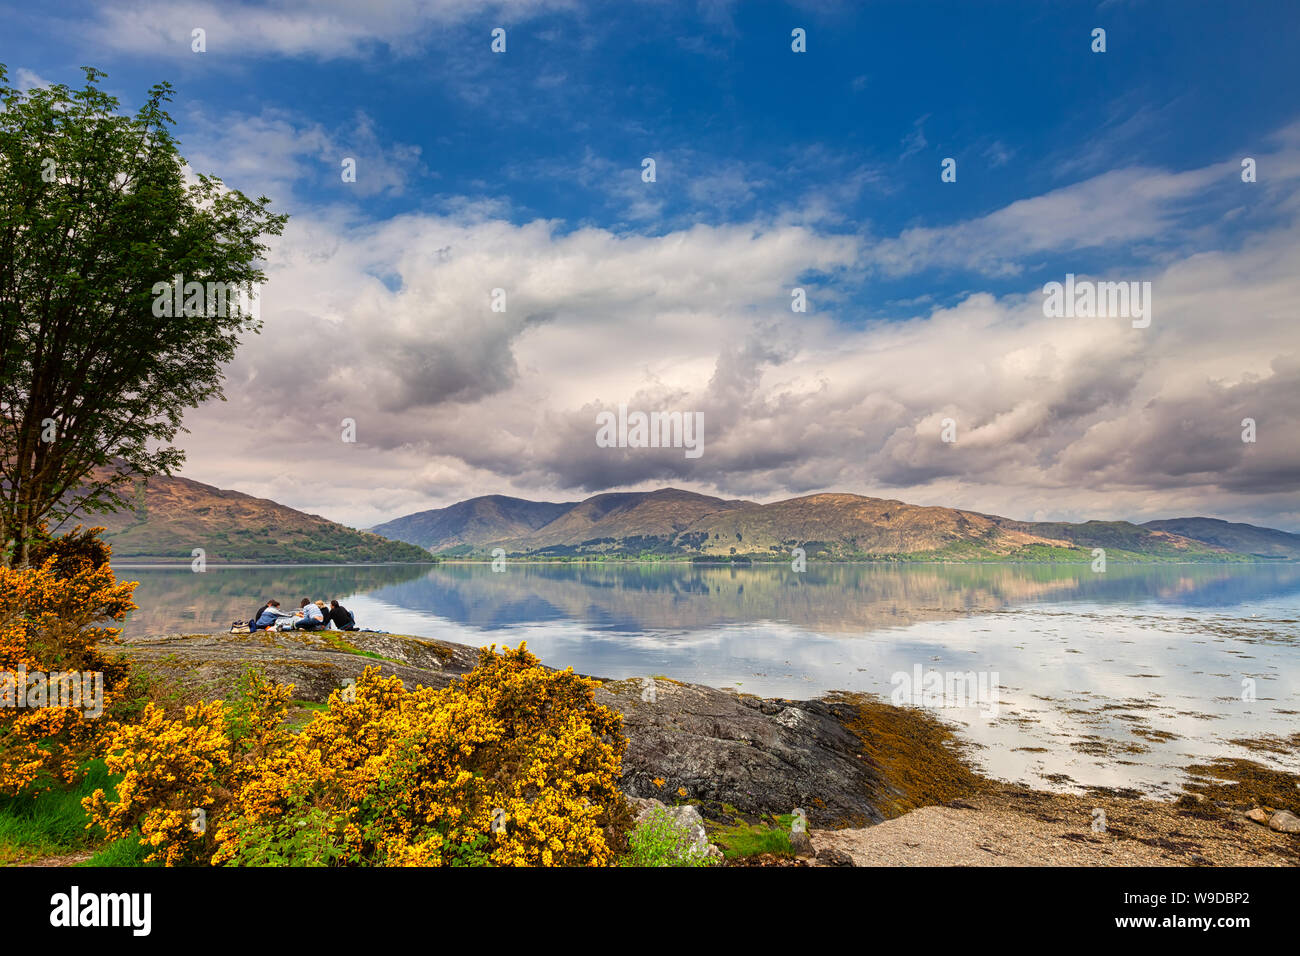 People having a relaxing picnic at Loch Linnhe in the highlands on a spring day - west coast Scotland - travel image Stock Photo